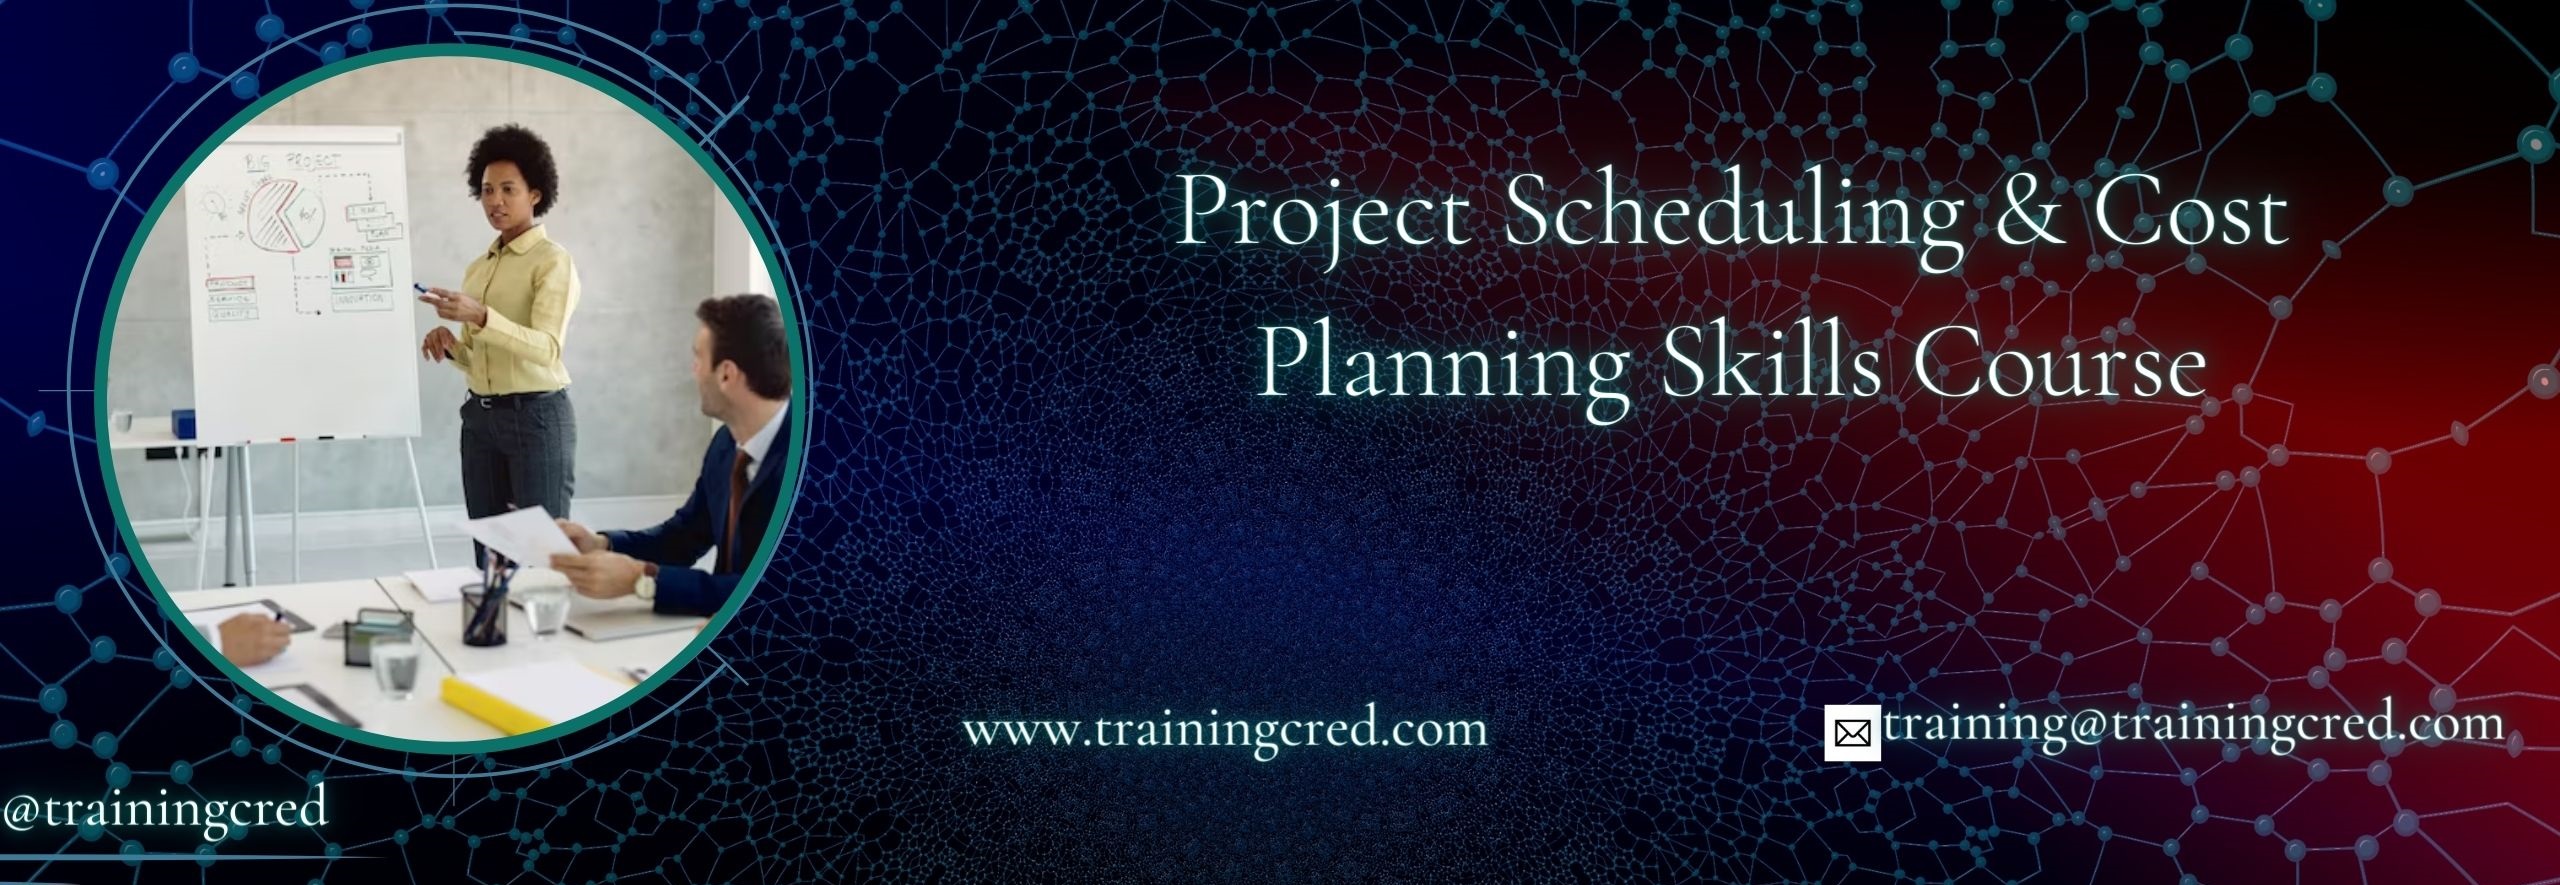 Project Scheduling and Cost Planning Skills Training